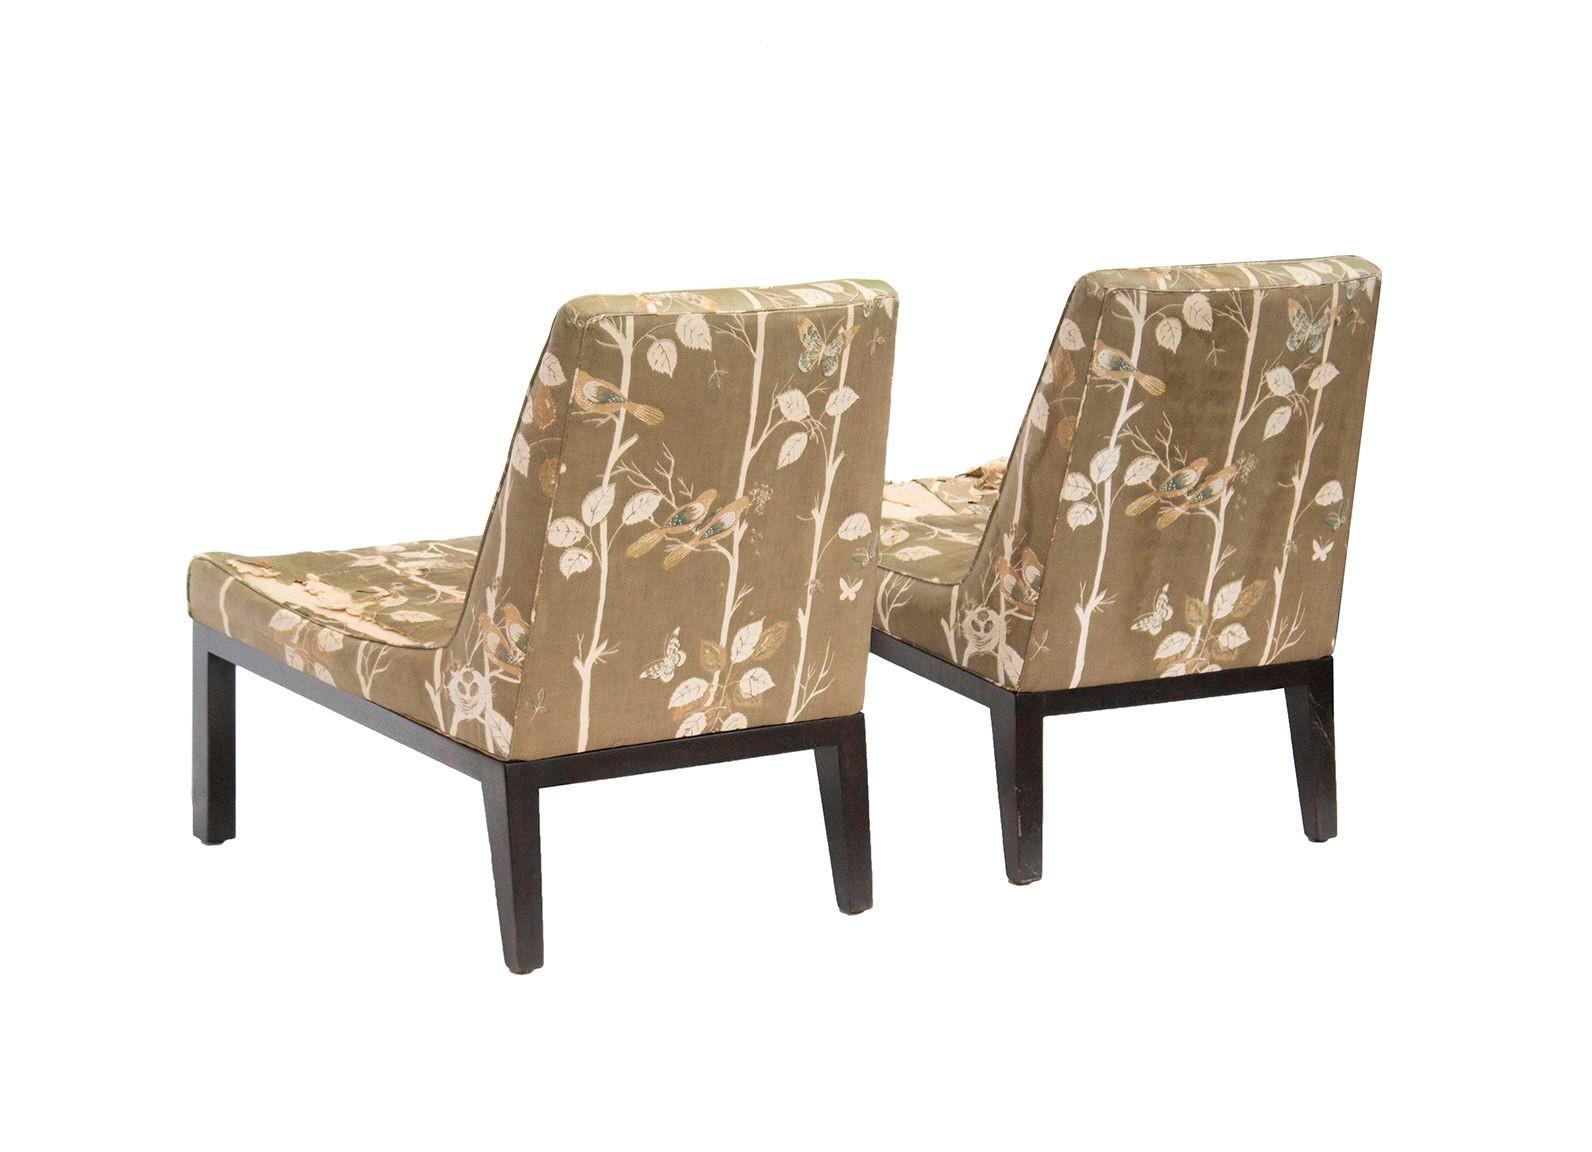 Silk Tufted Slipper Chairs by Edward Wormley for Dunbar, pair For Sale